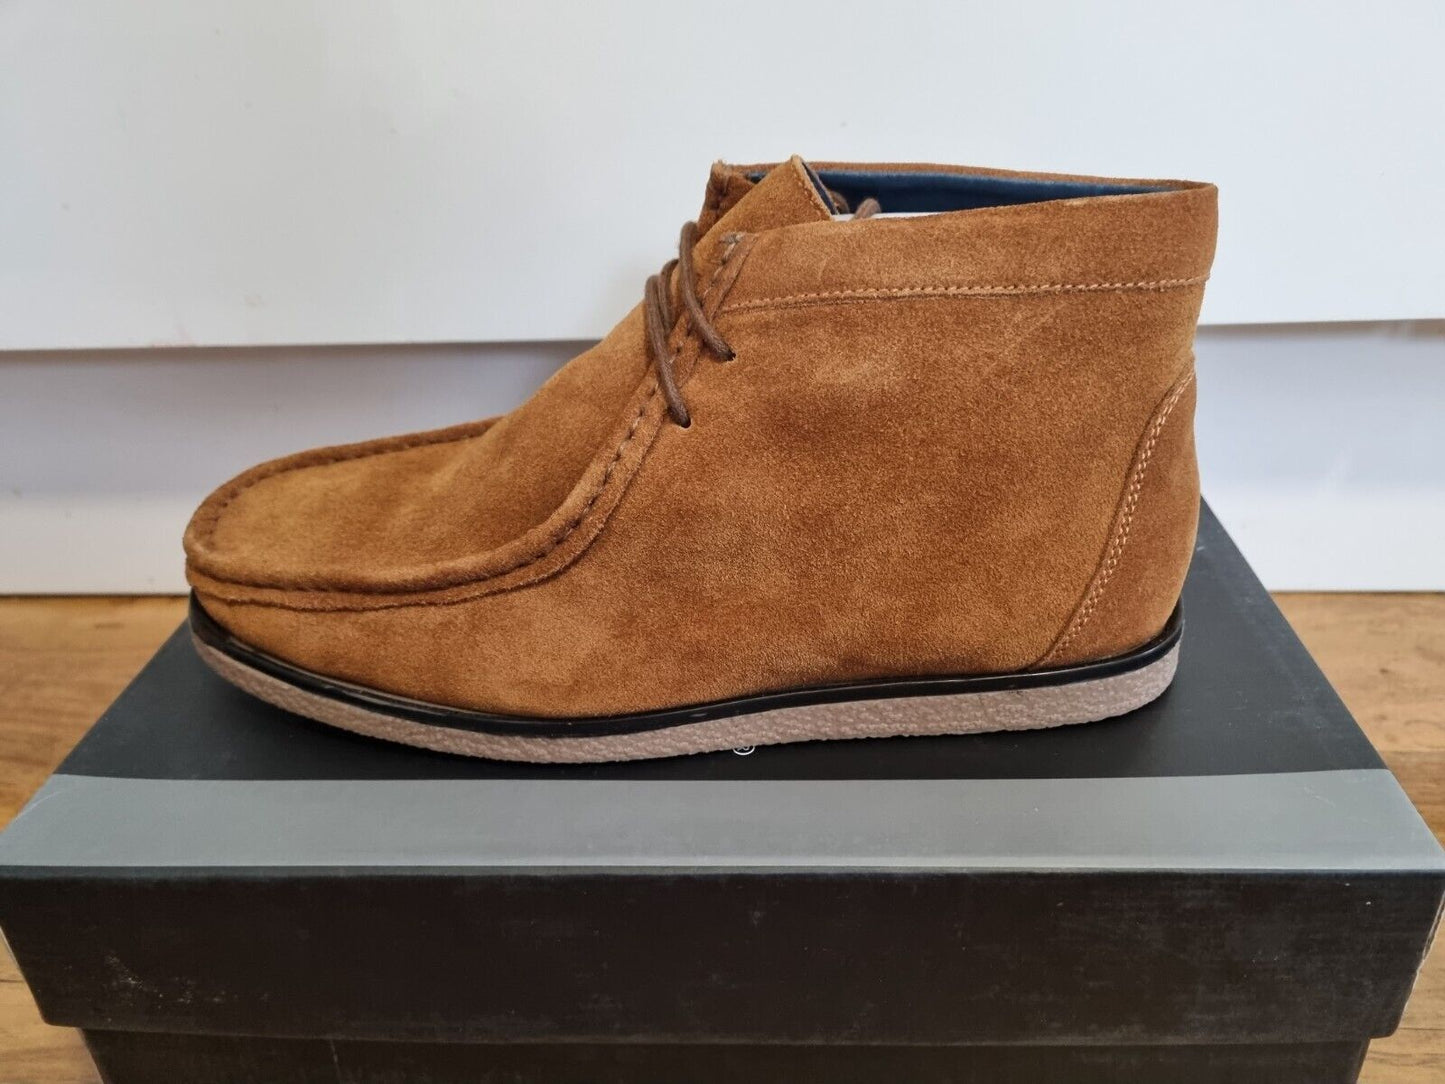 Desert Boot by Roamers - Apron Para Style - Tan Suede Leather (M192BS)